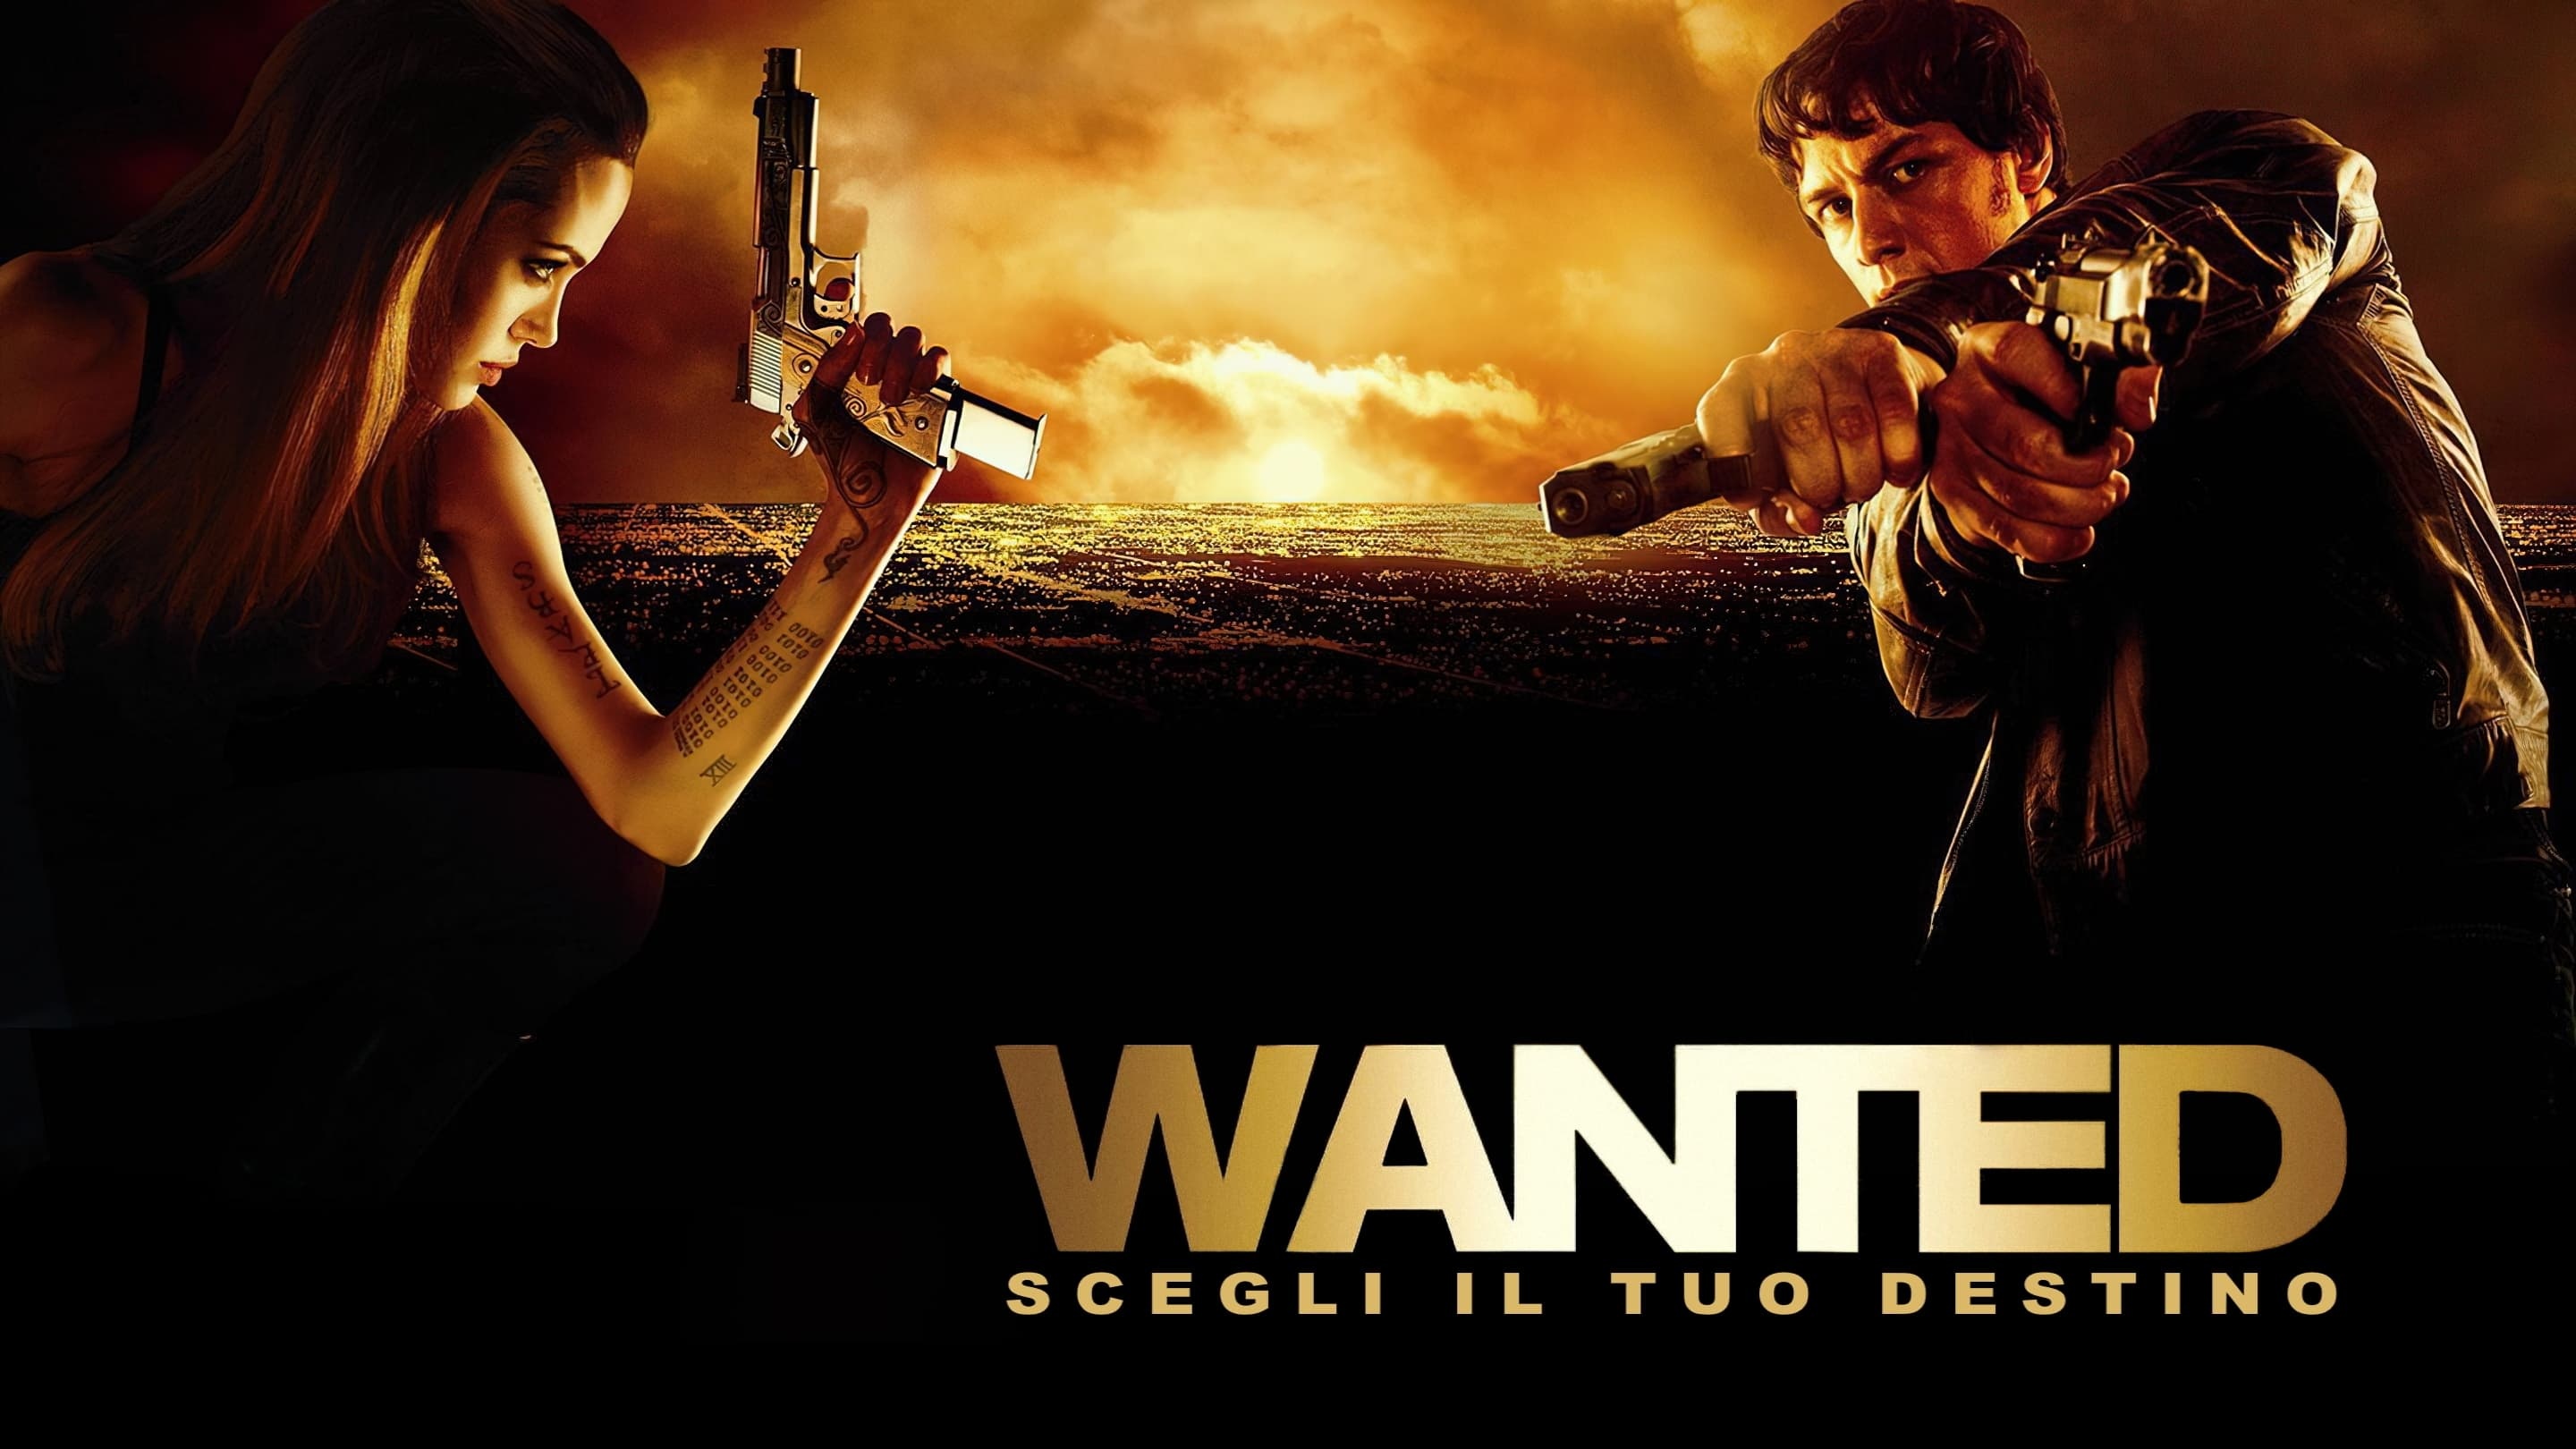 Wanted movie, Action-packed thriller, Deadly assassins, Intricate plot, 2880x1620 HD Desktop